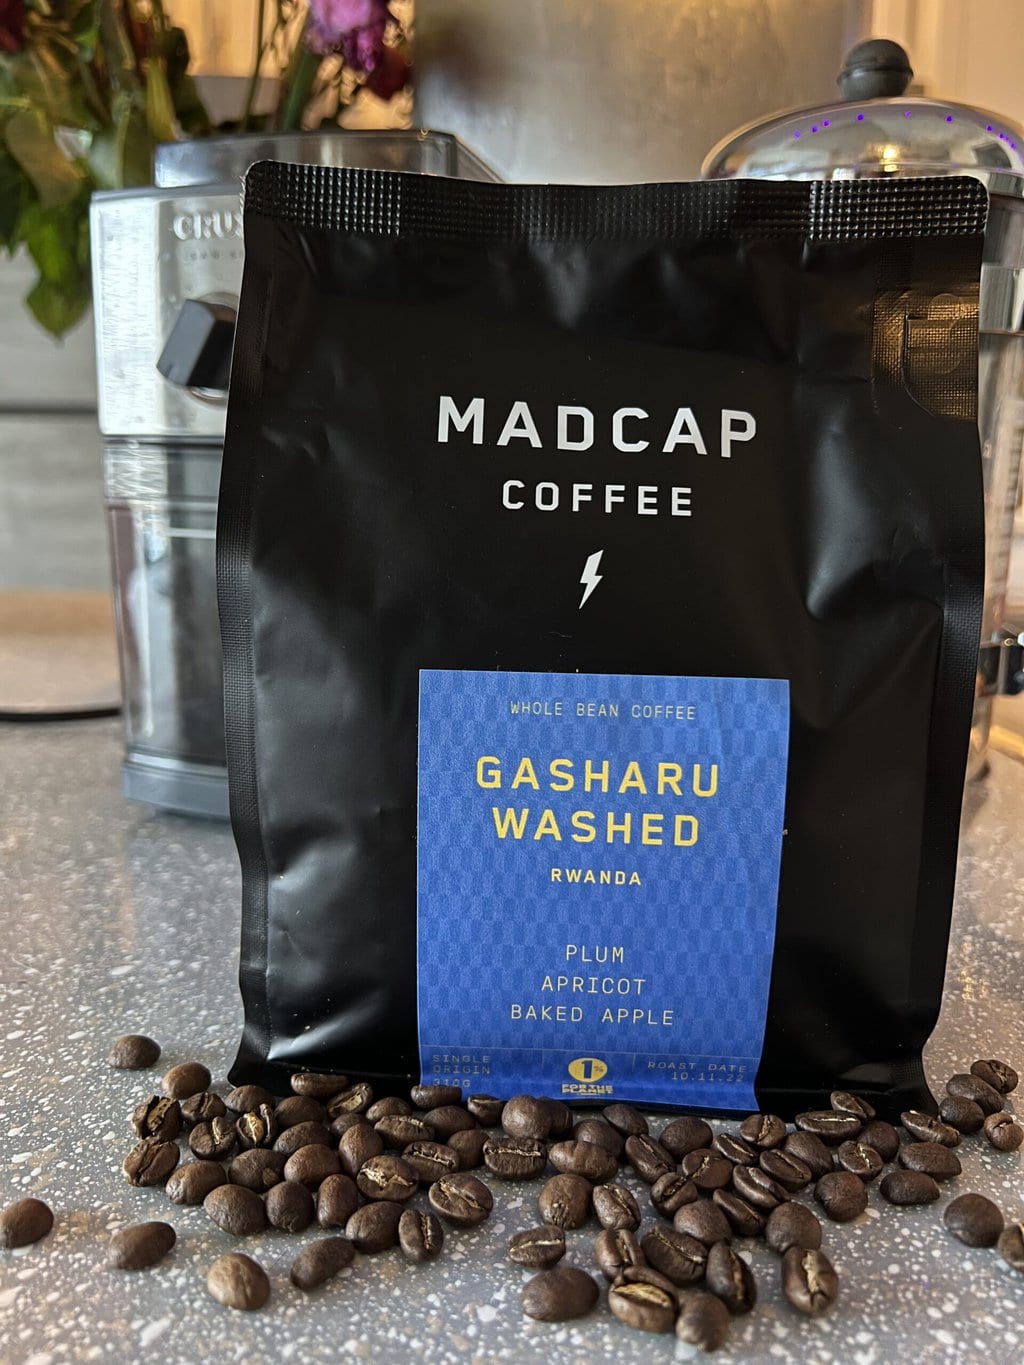 Gasharu Washed - Madcap Coffee pack and scattered coffee beans next to the coffee grinder and french press